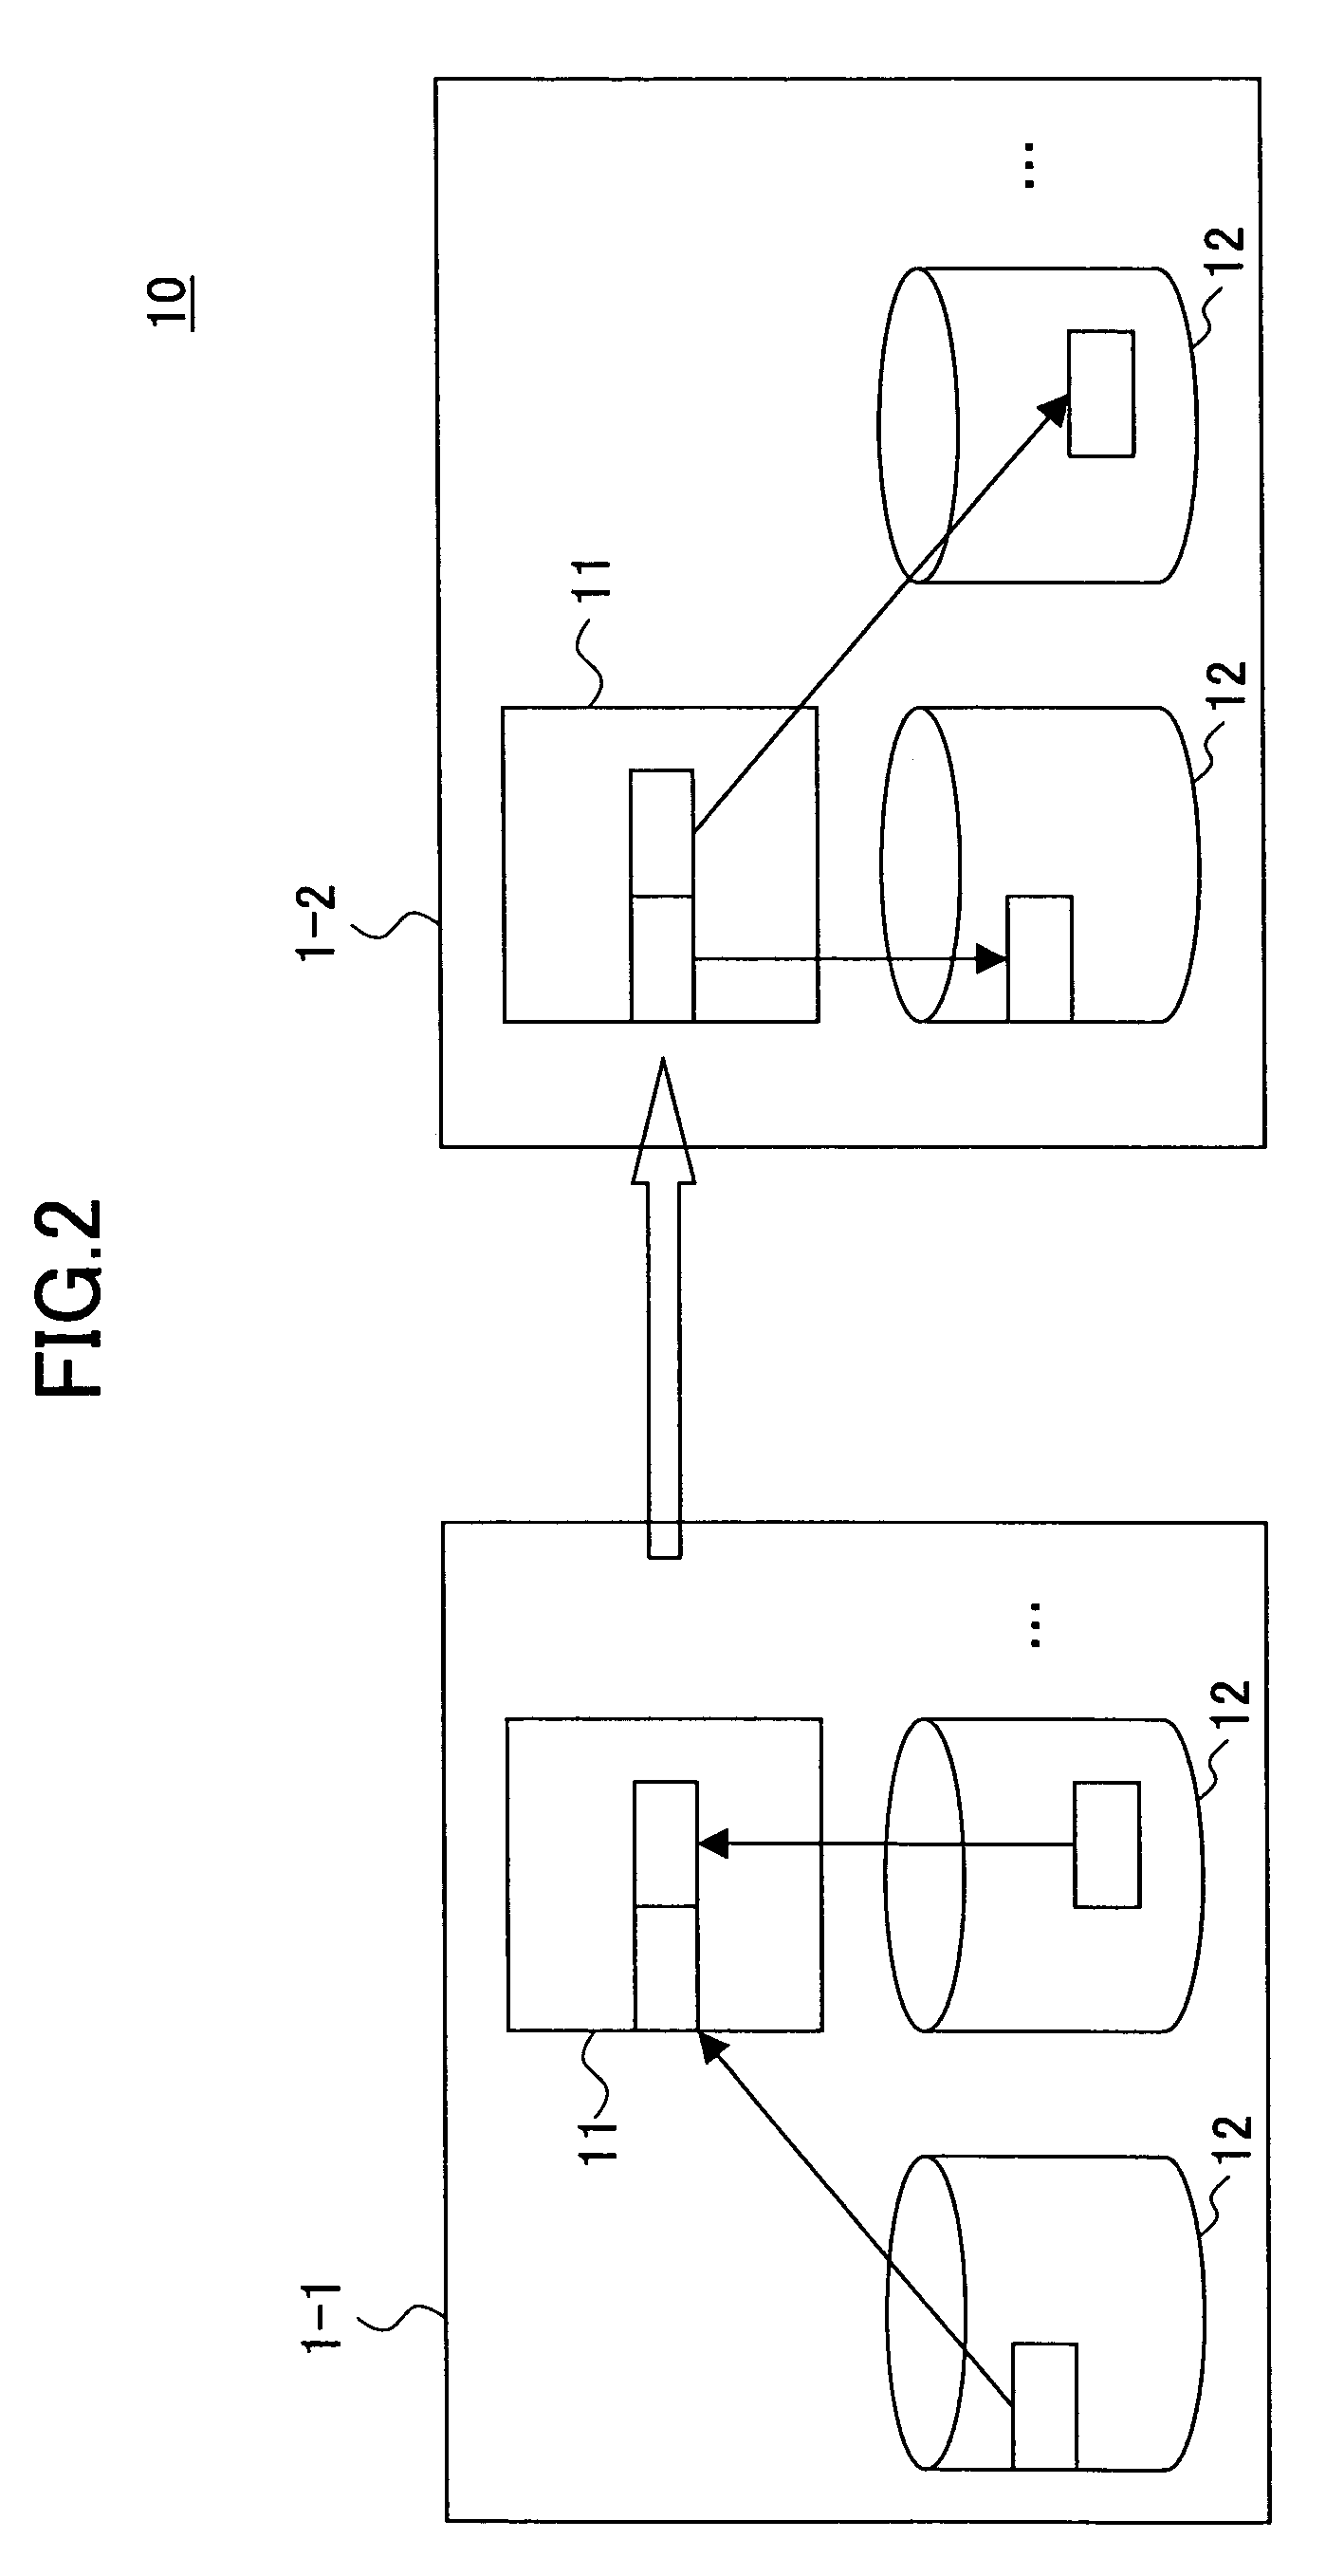 Remote copy method and storage system